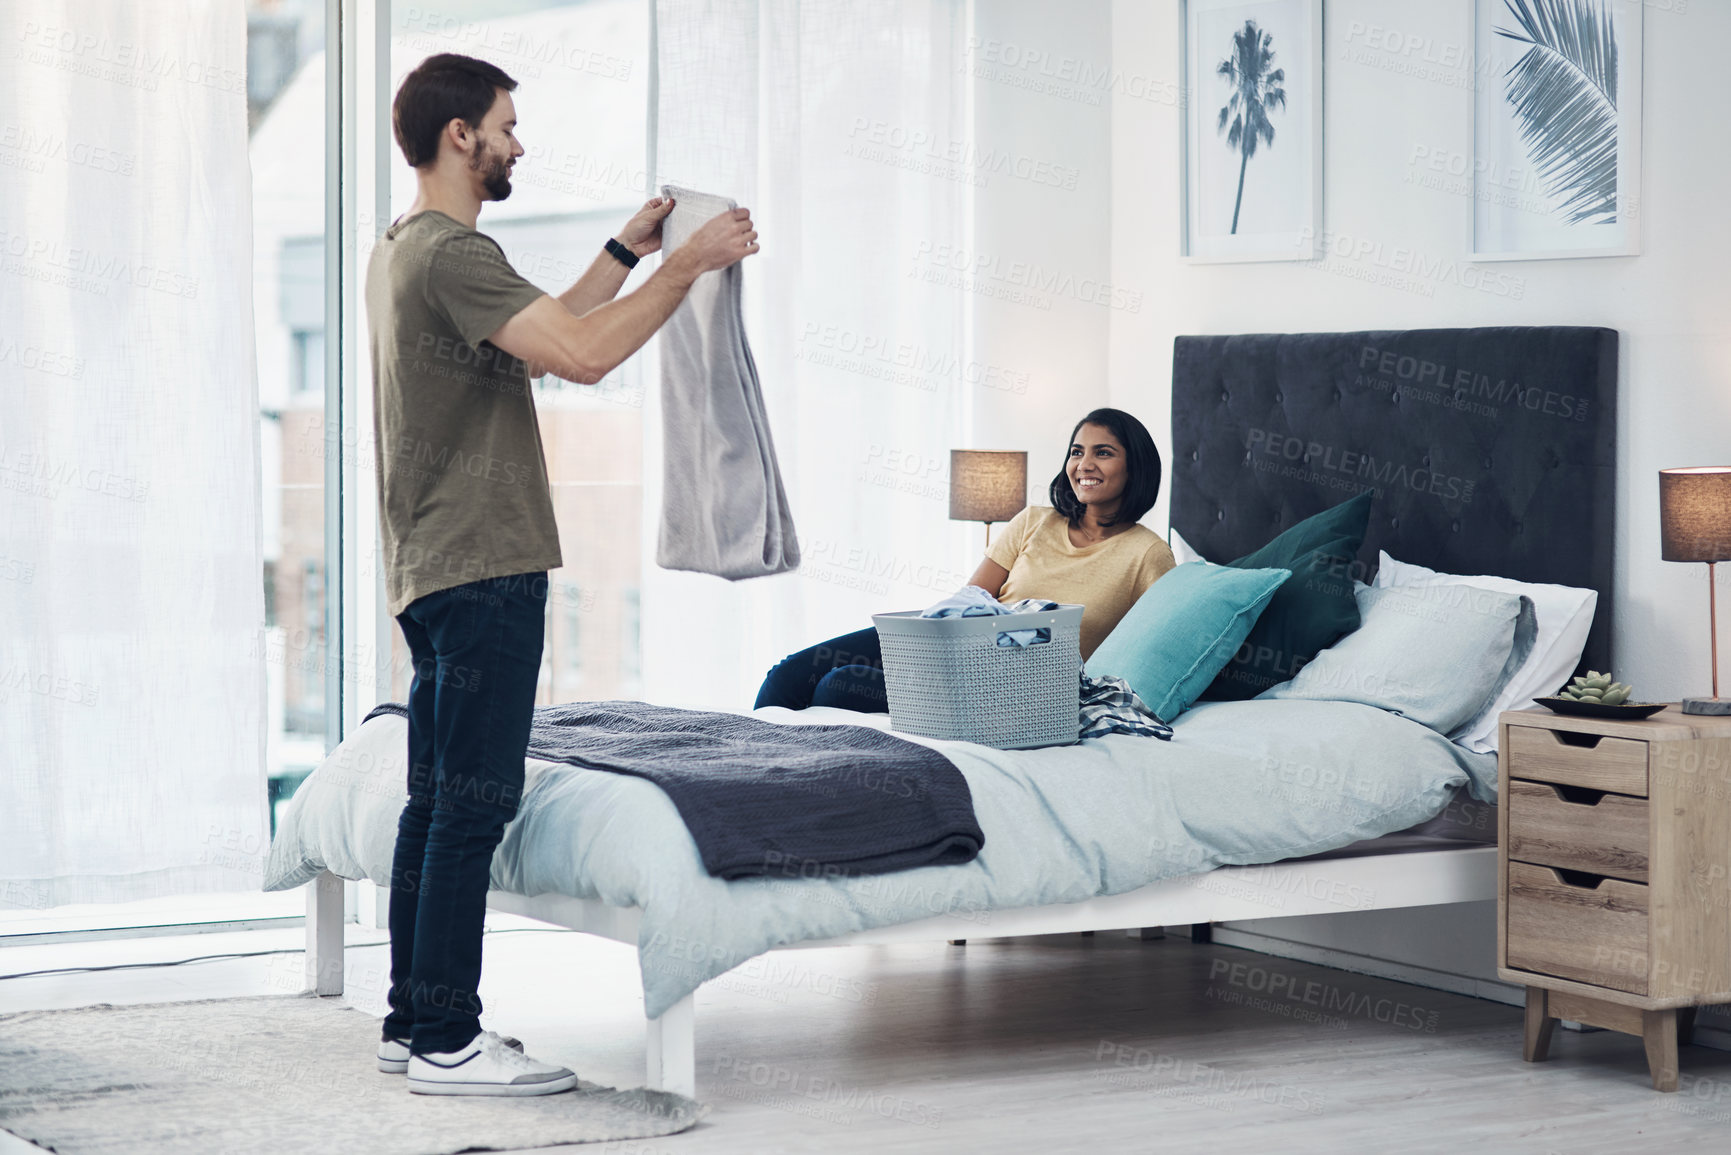 Buy stock photo Shot of a young man folding laundry while his wife relaxes on the bed at home